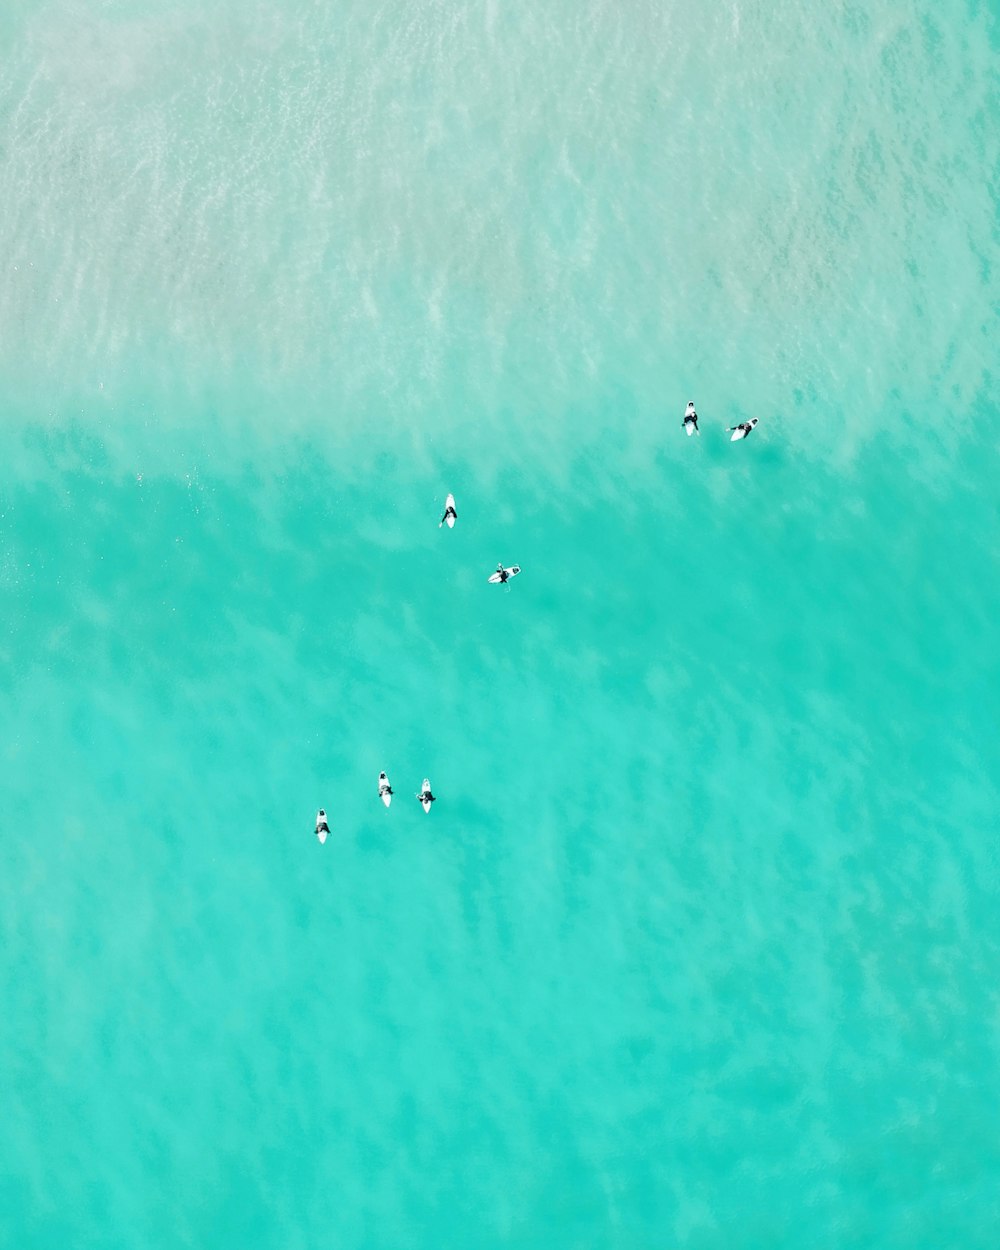 a group of people in the ocean on surfboards